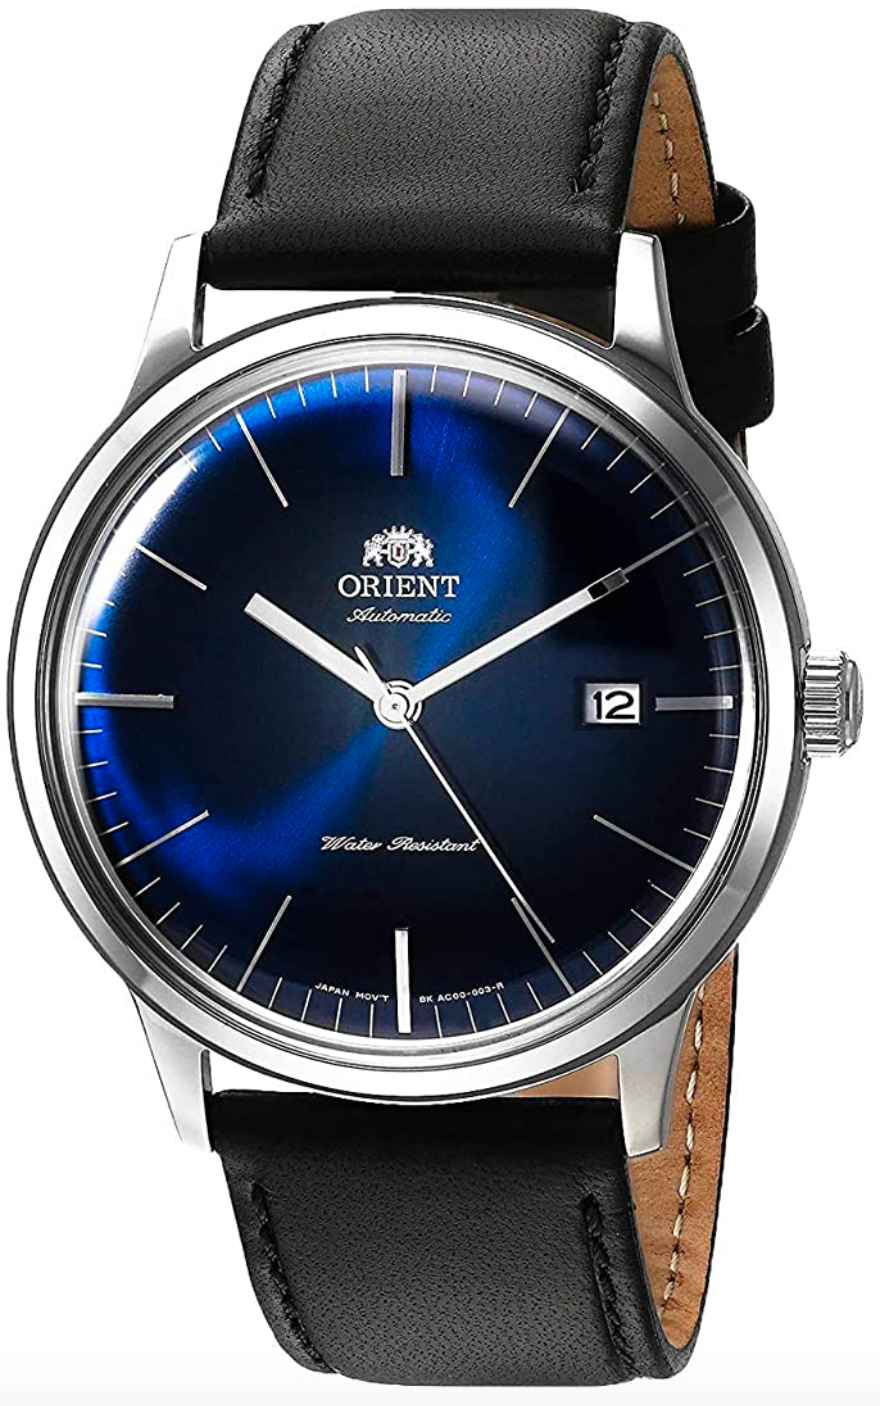 Orient '2nd Gen Bambino Version III' Japanese Automatic Stainless Steel and Leather Dress Watch